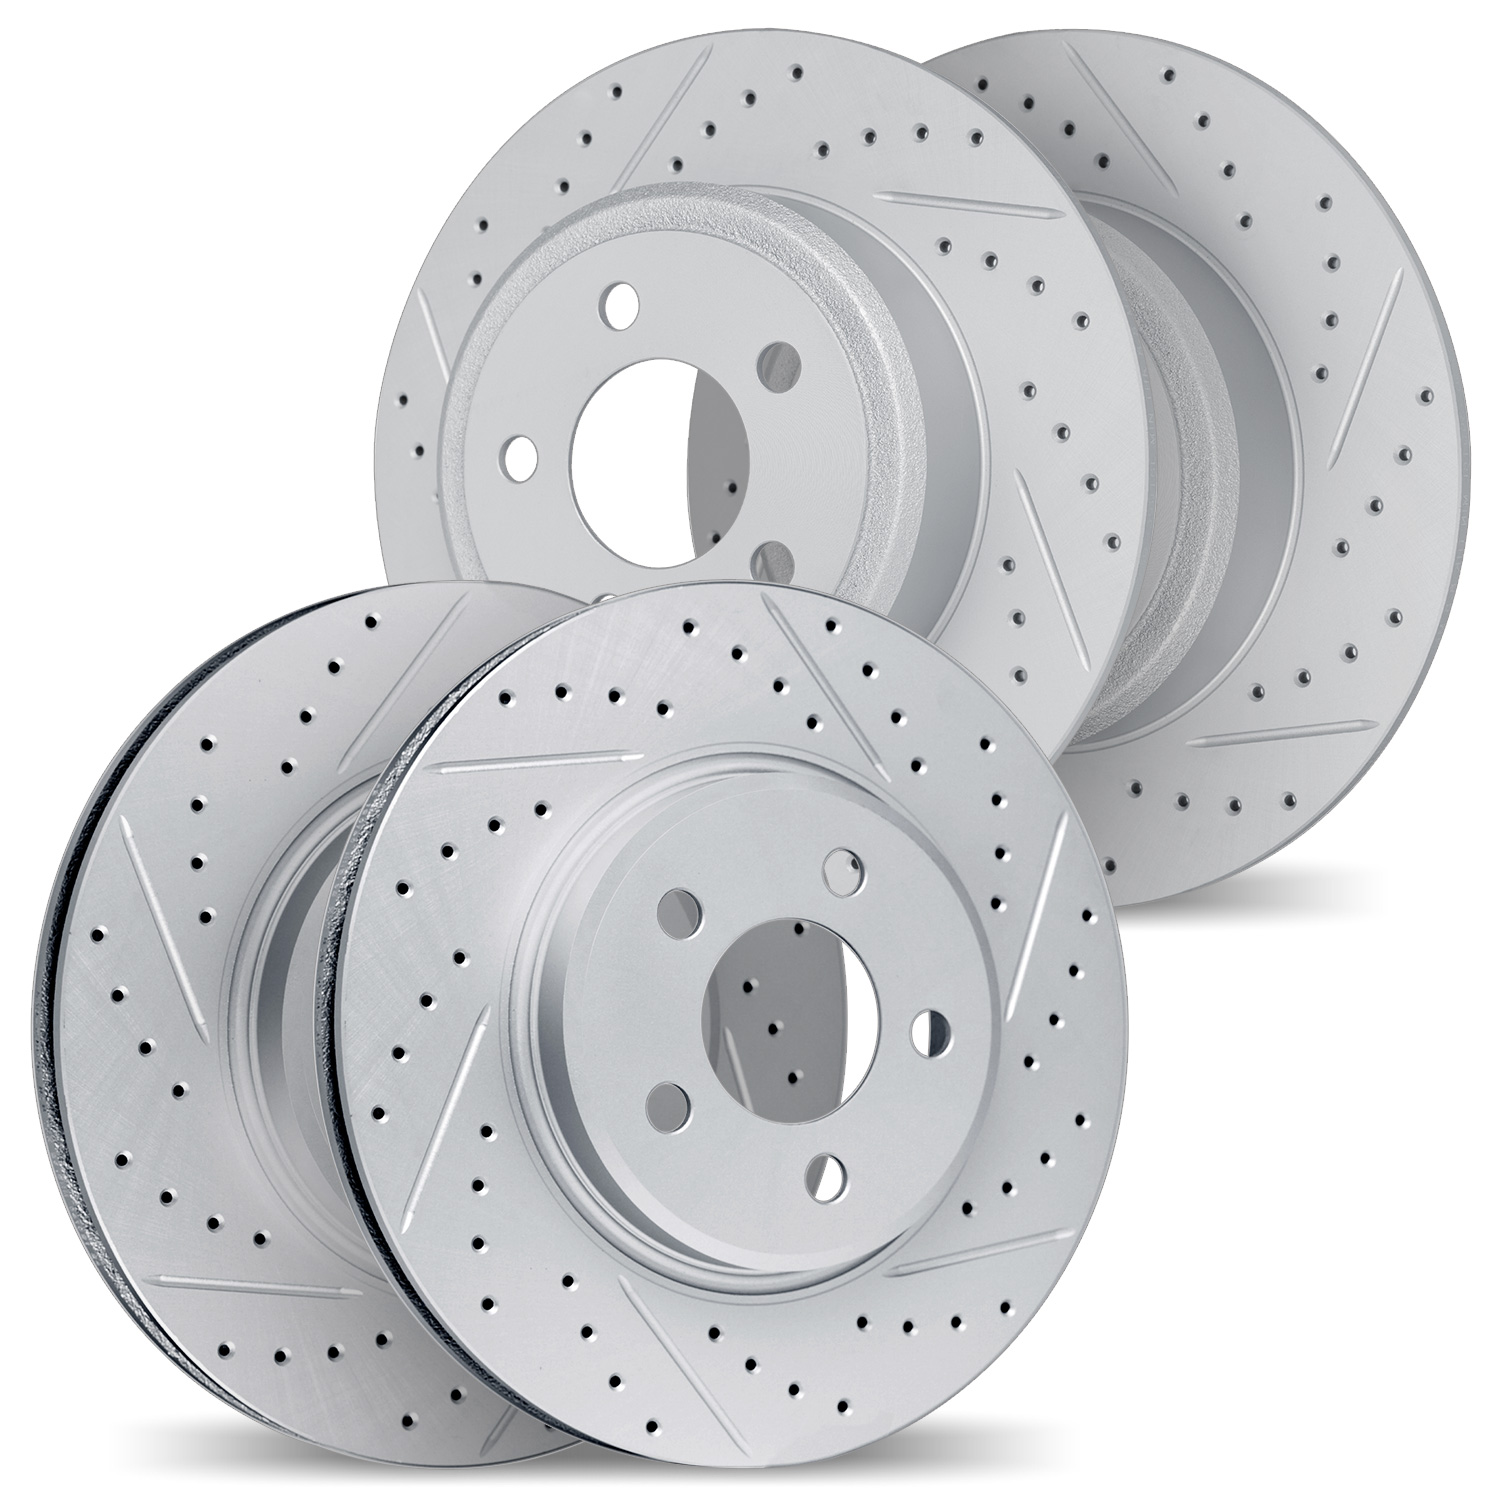 2004-76033 Geoperformance Drilled/Slotted Brake Rotors, 2000-2004 Lexus/Toyota/Scion, Position: Front and Rear